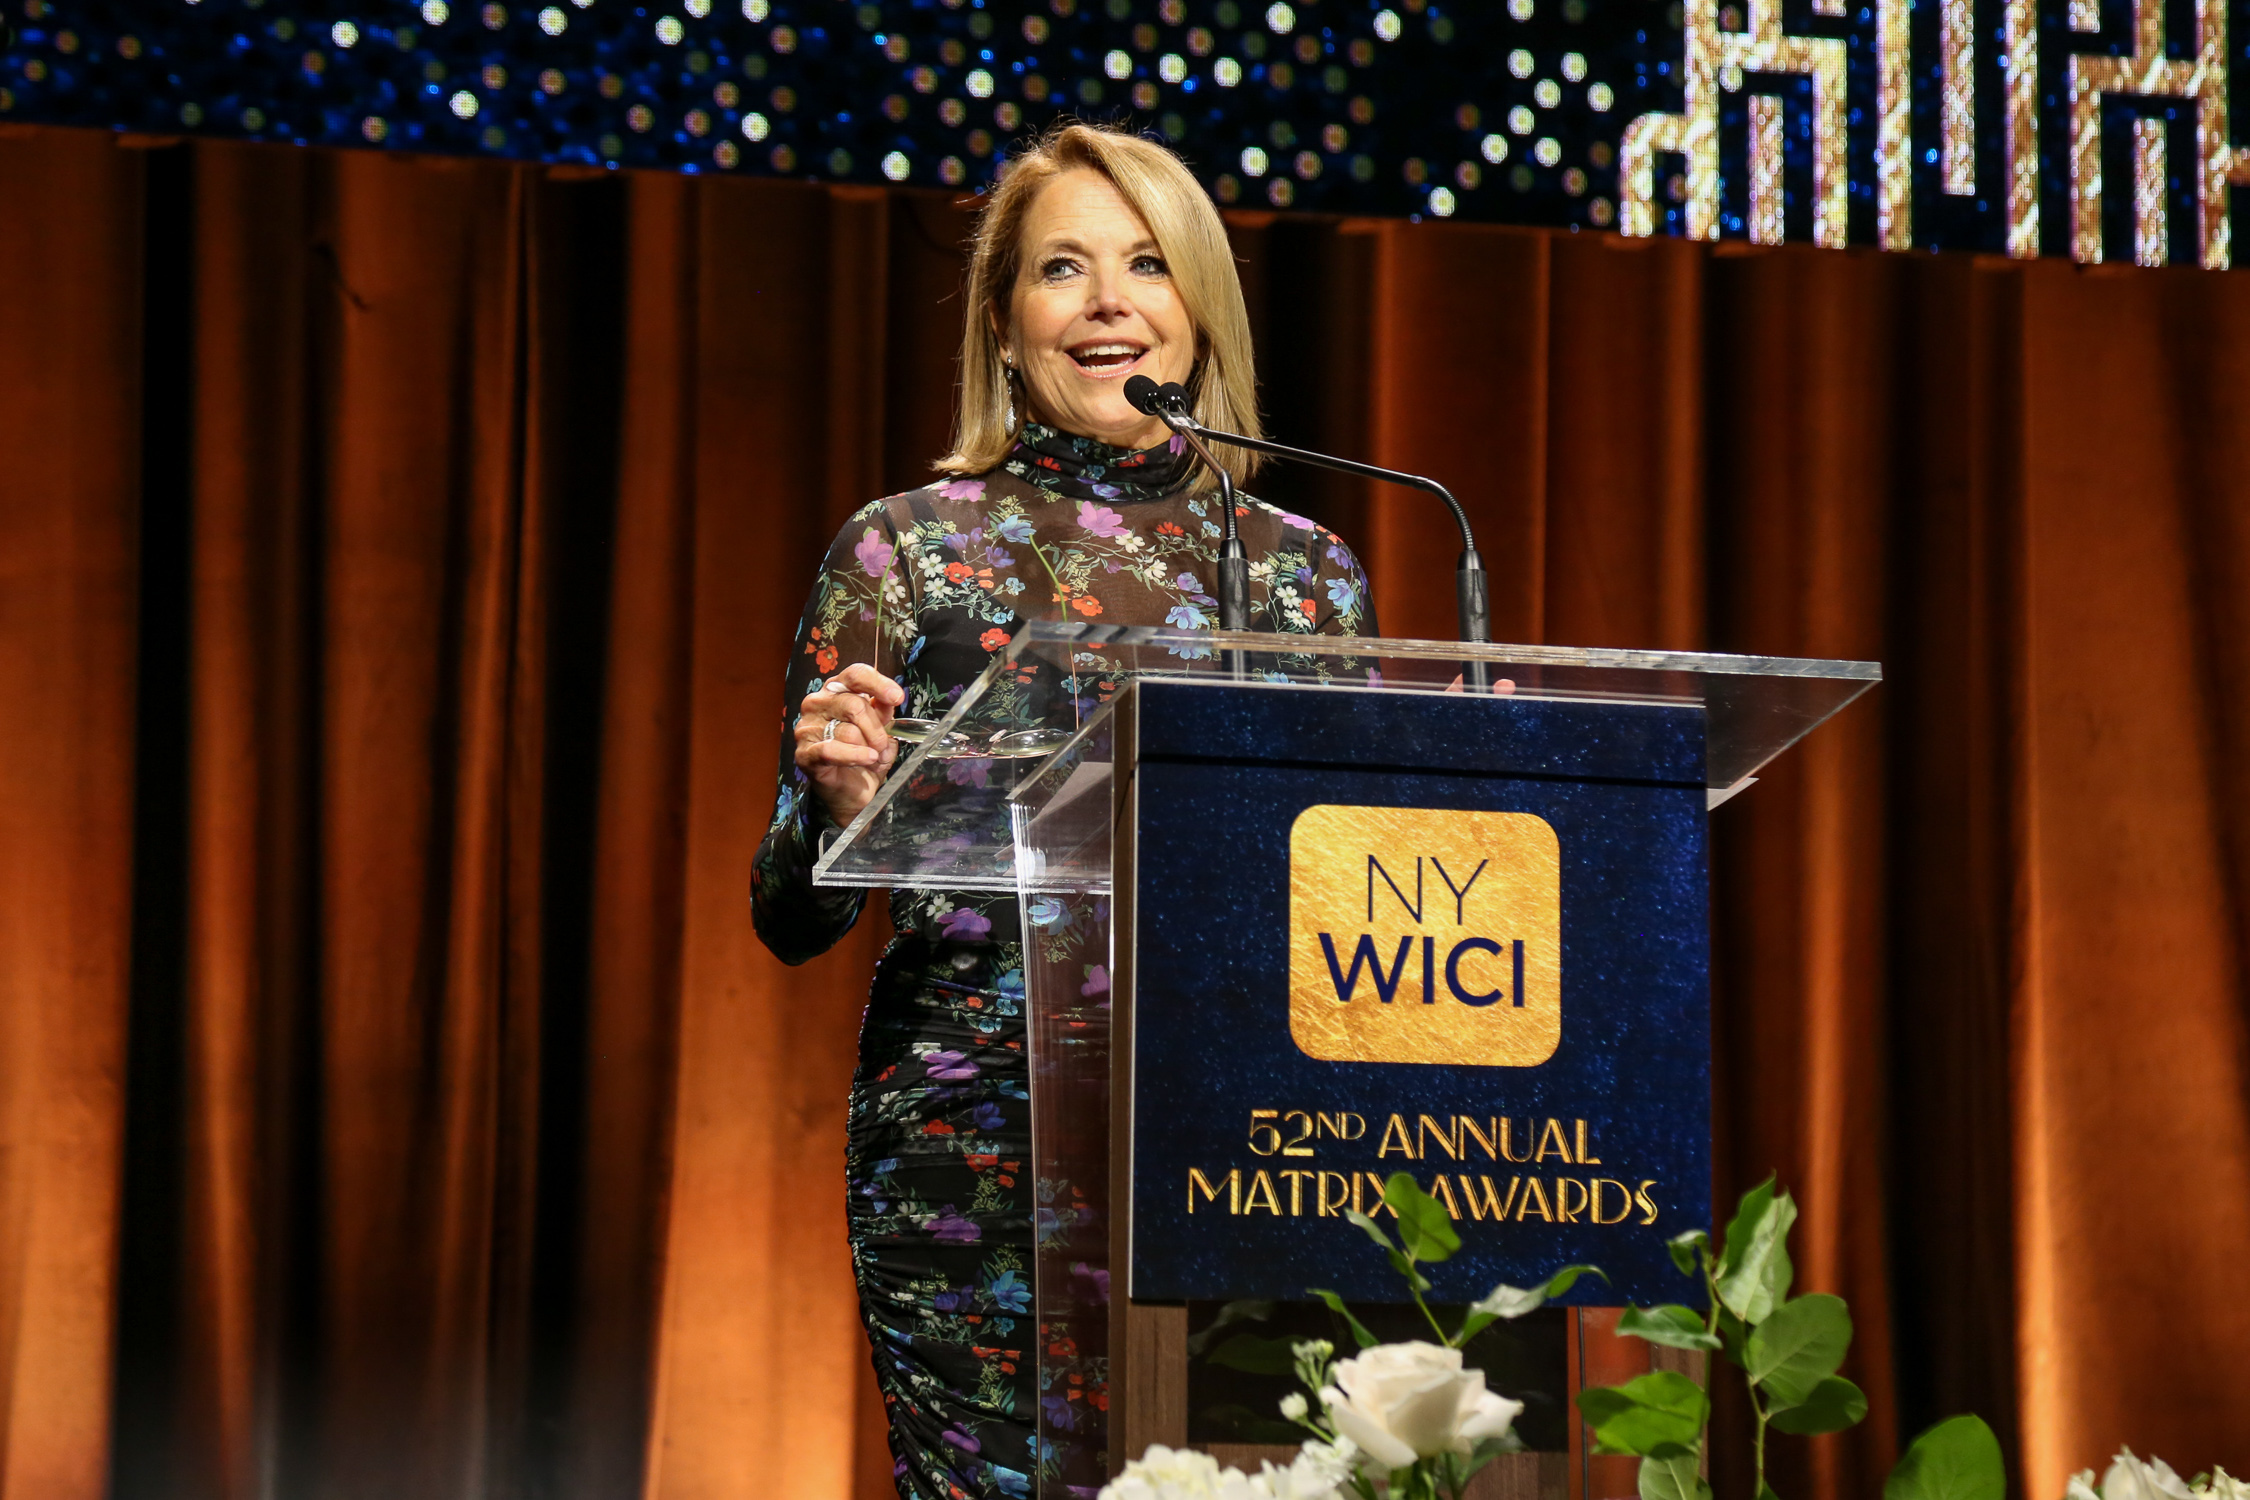 The 52nd Annual Matrix Awards with host Katie Couric